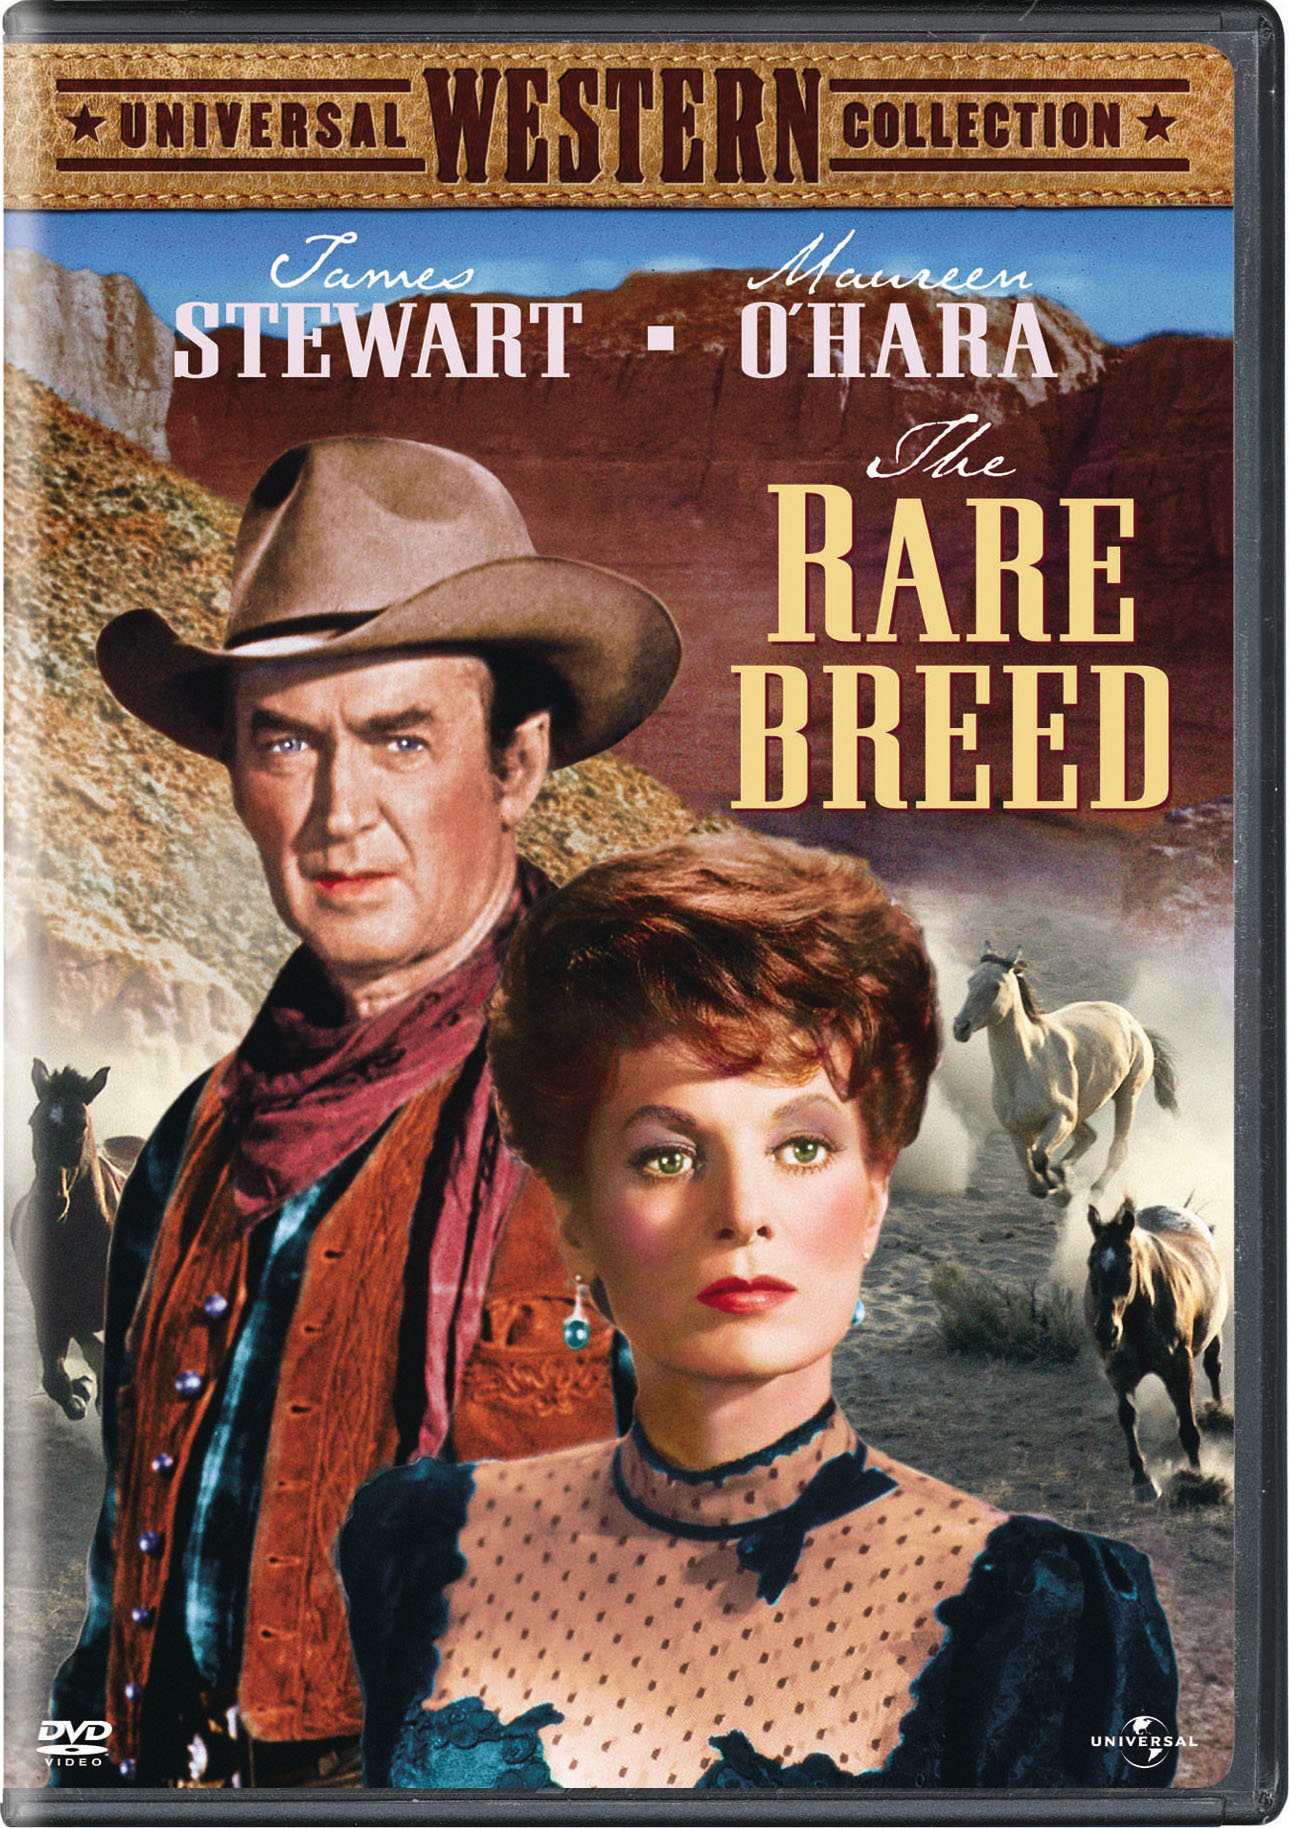 The Rare Breed - DVD [ 1966 ]  - Western Movies On DVD - Movies On GRUV